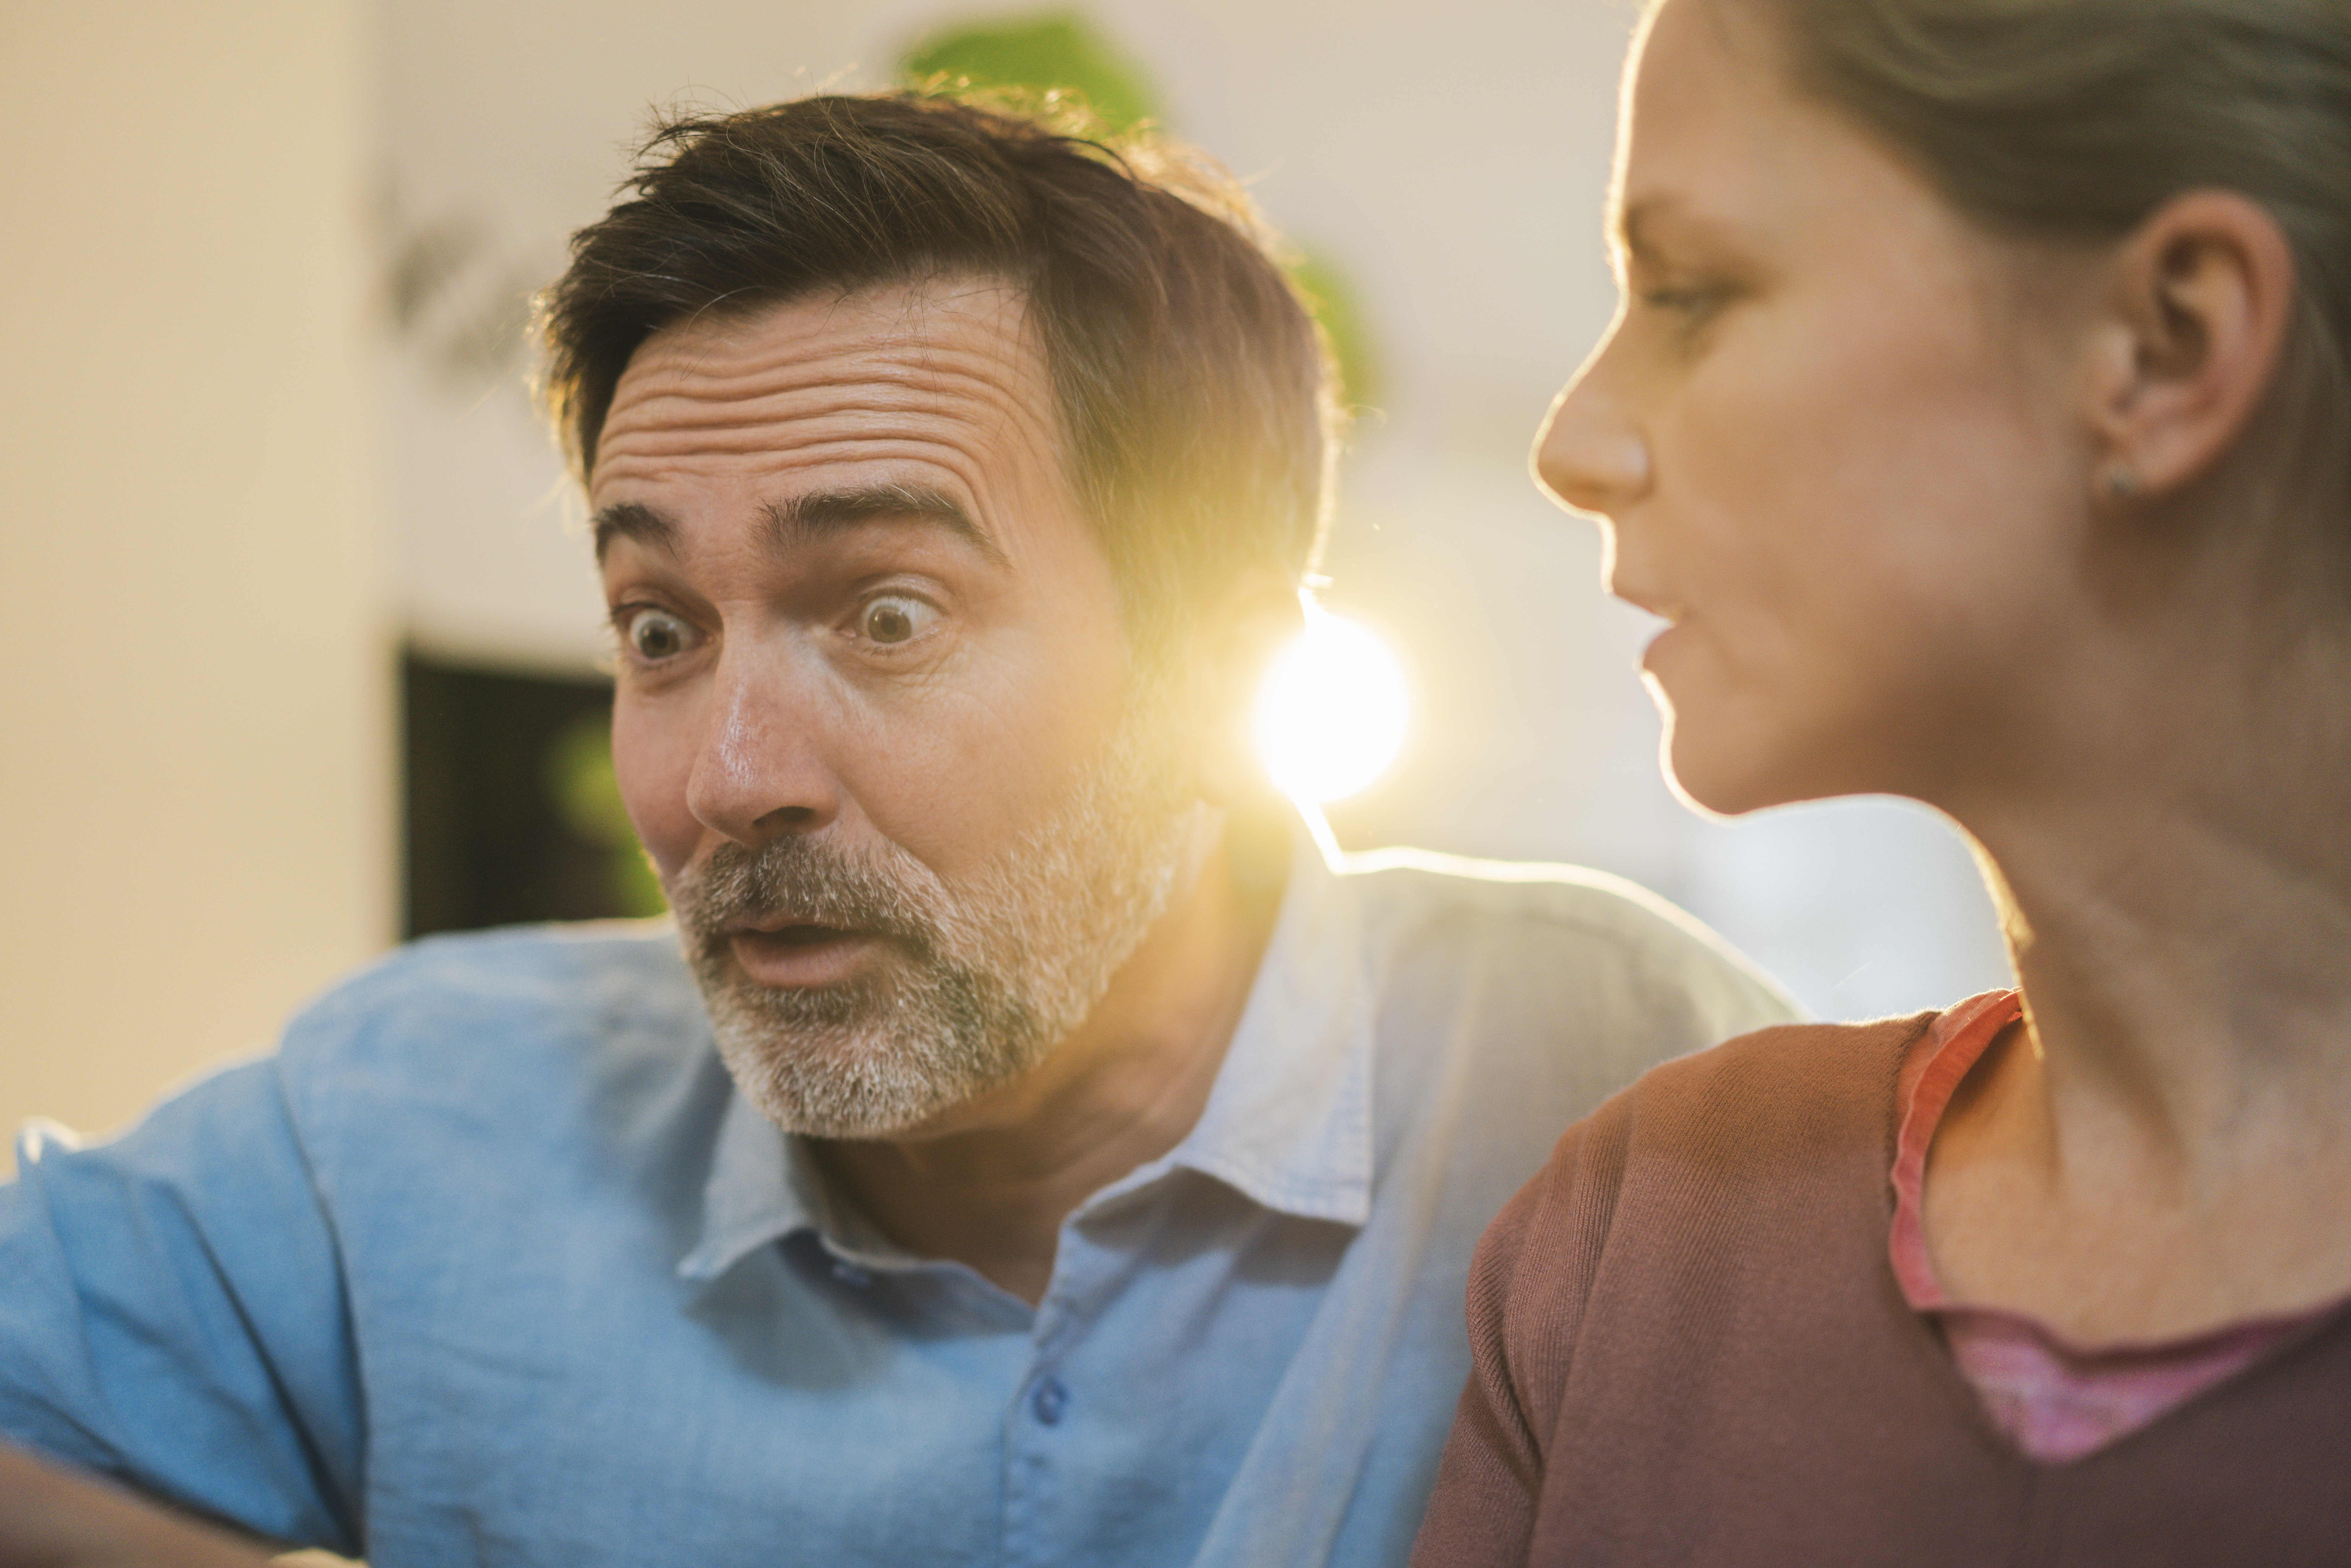 Mature man with raised eyebrows by wife at home | Source: Getty Images